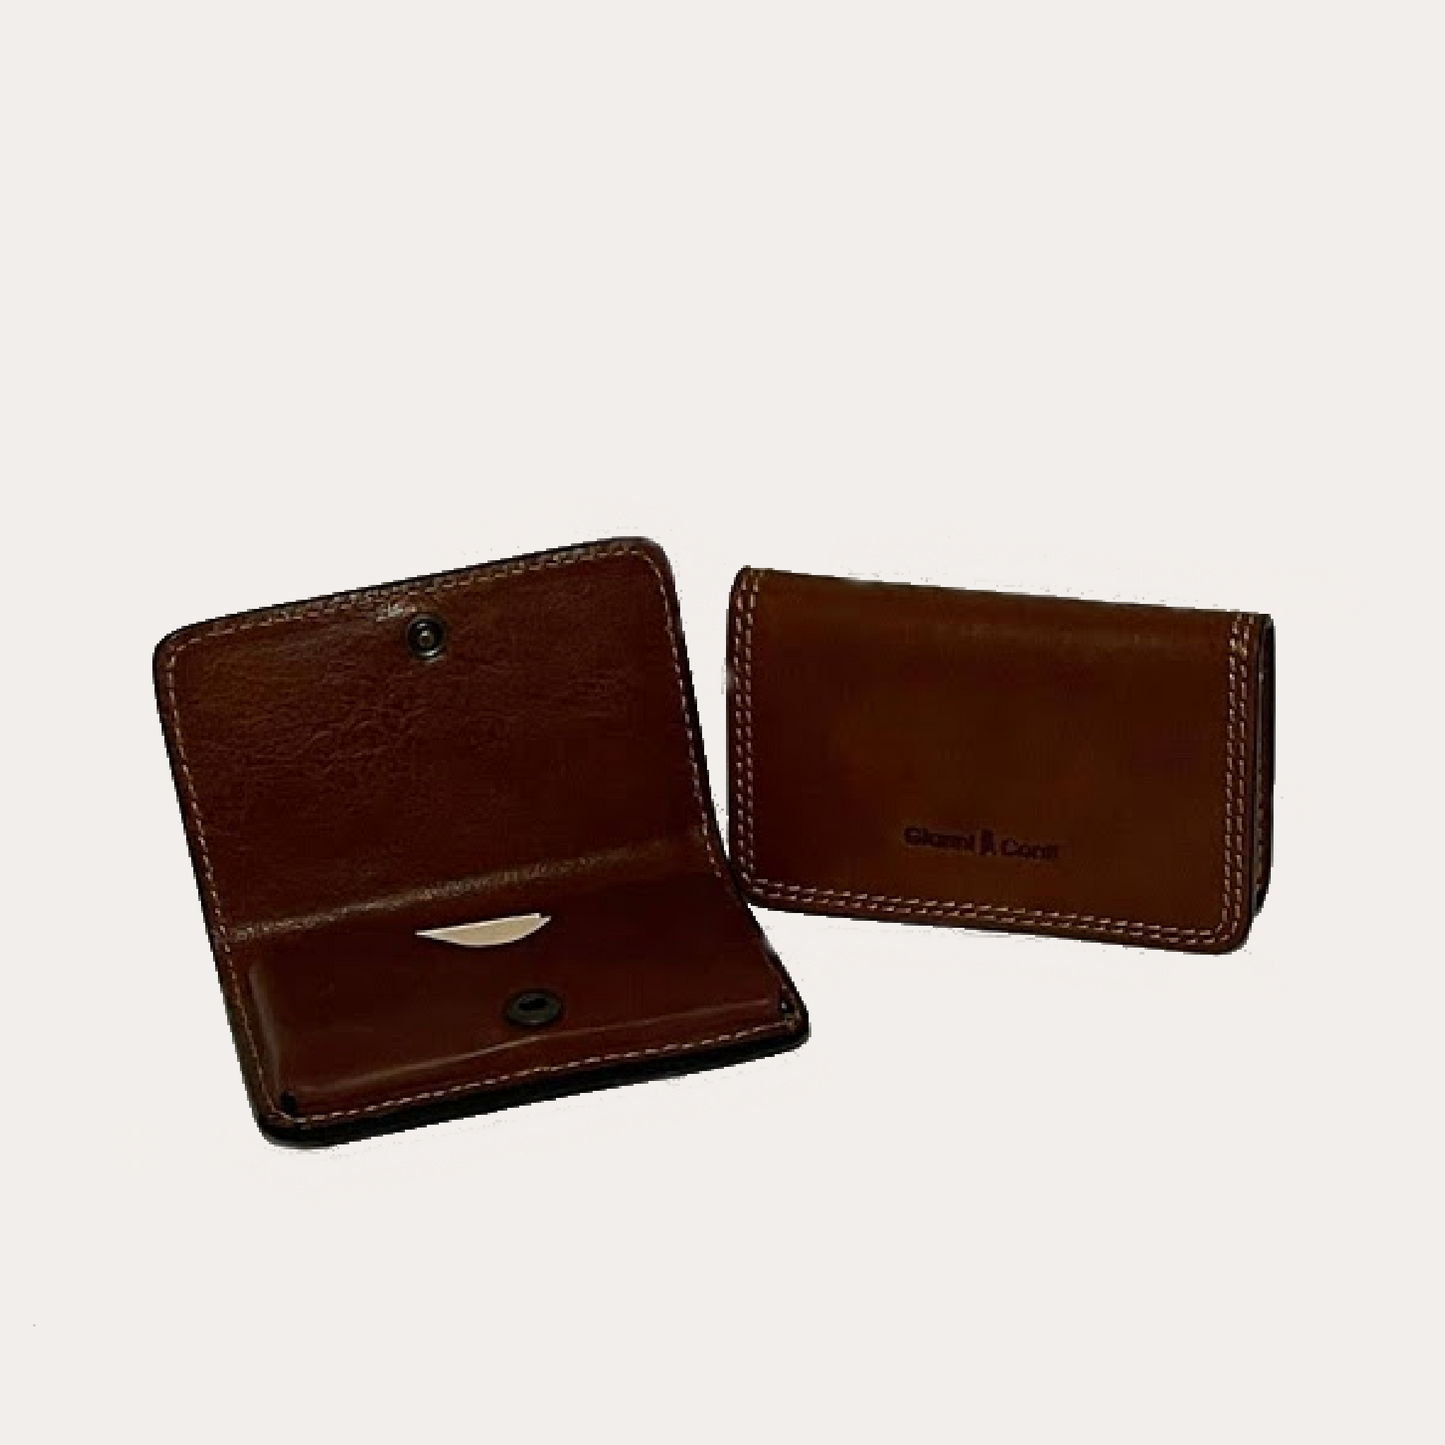 Gianni Conti Tan Leather Credit Card/Business Card Holder